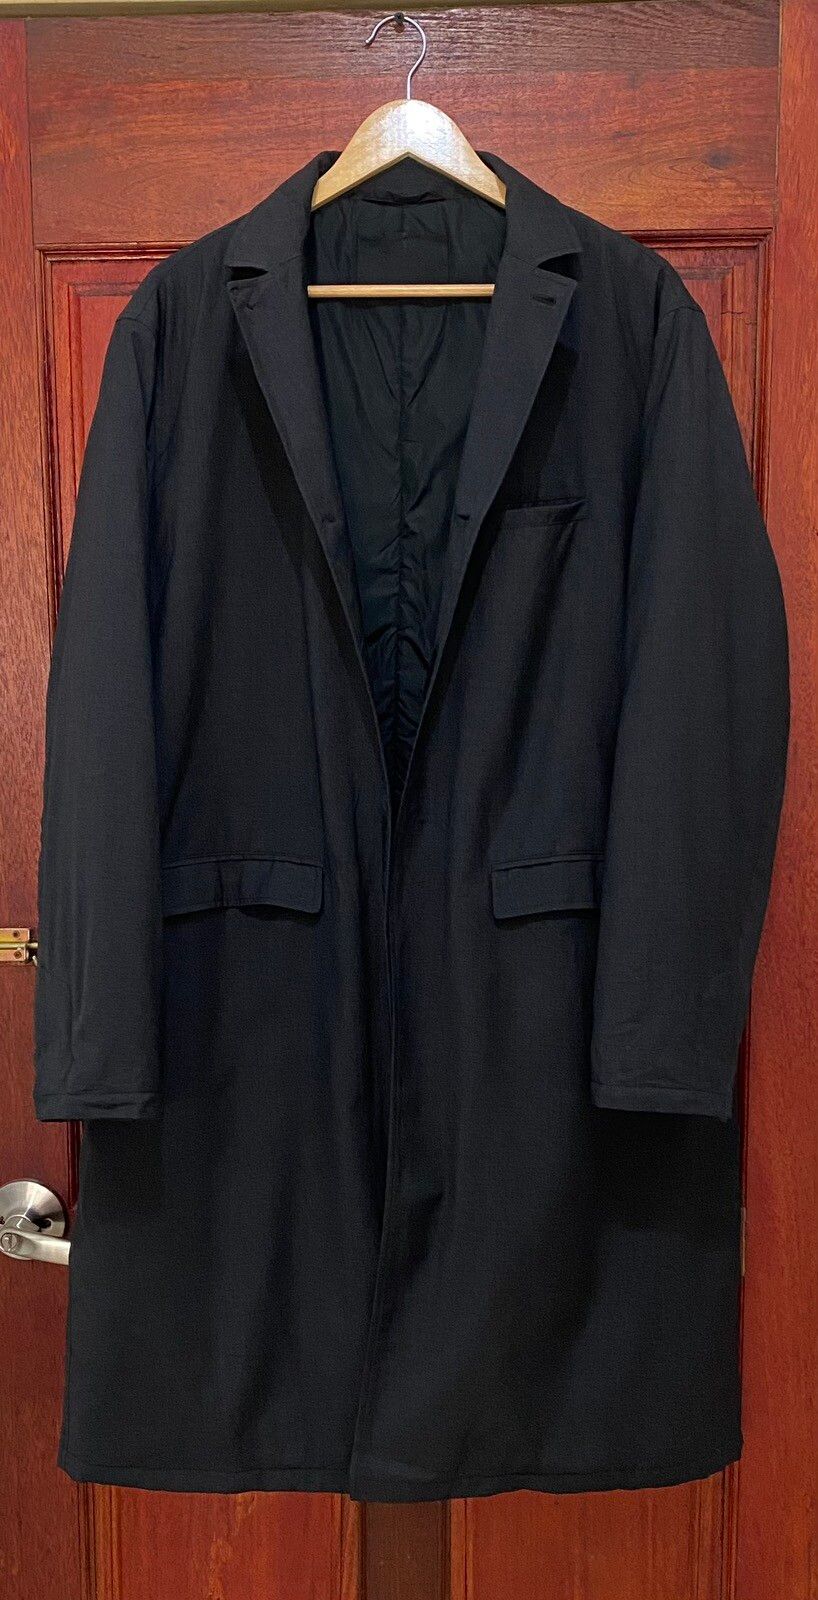 Prada Trench Coat Wool Padded Jacket Perfect Condition - 6